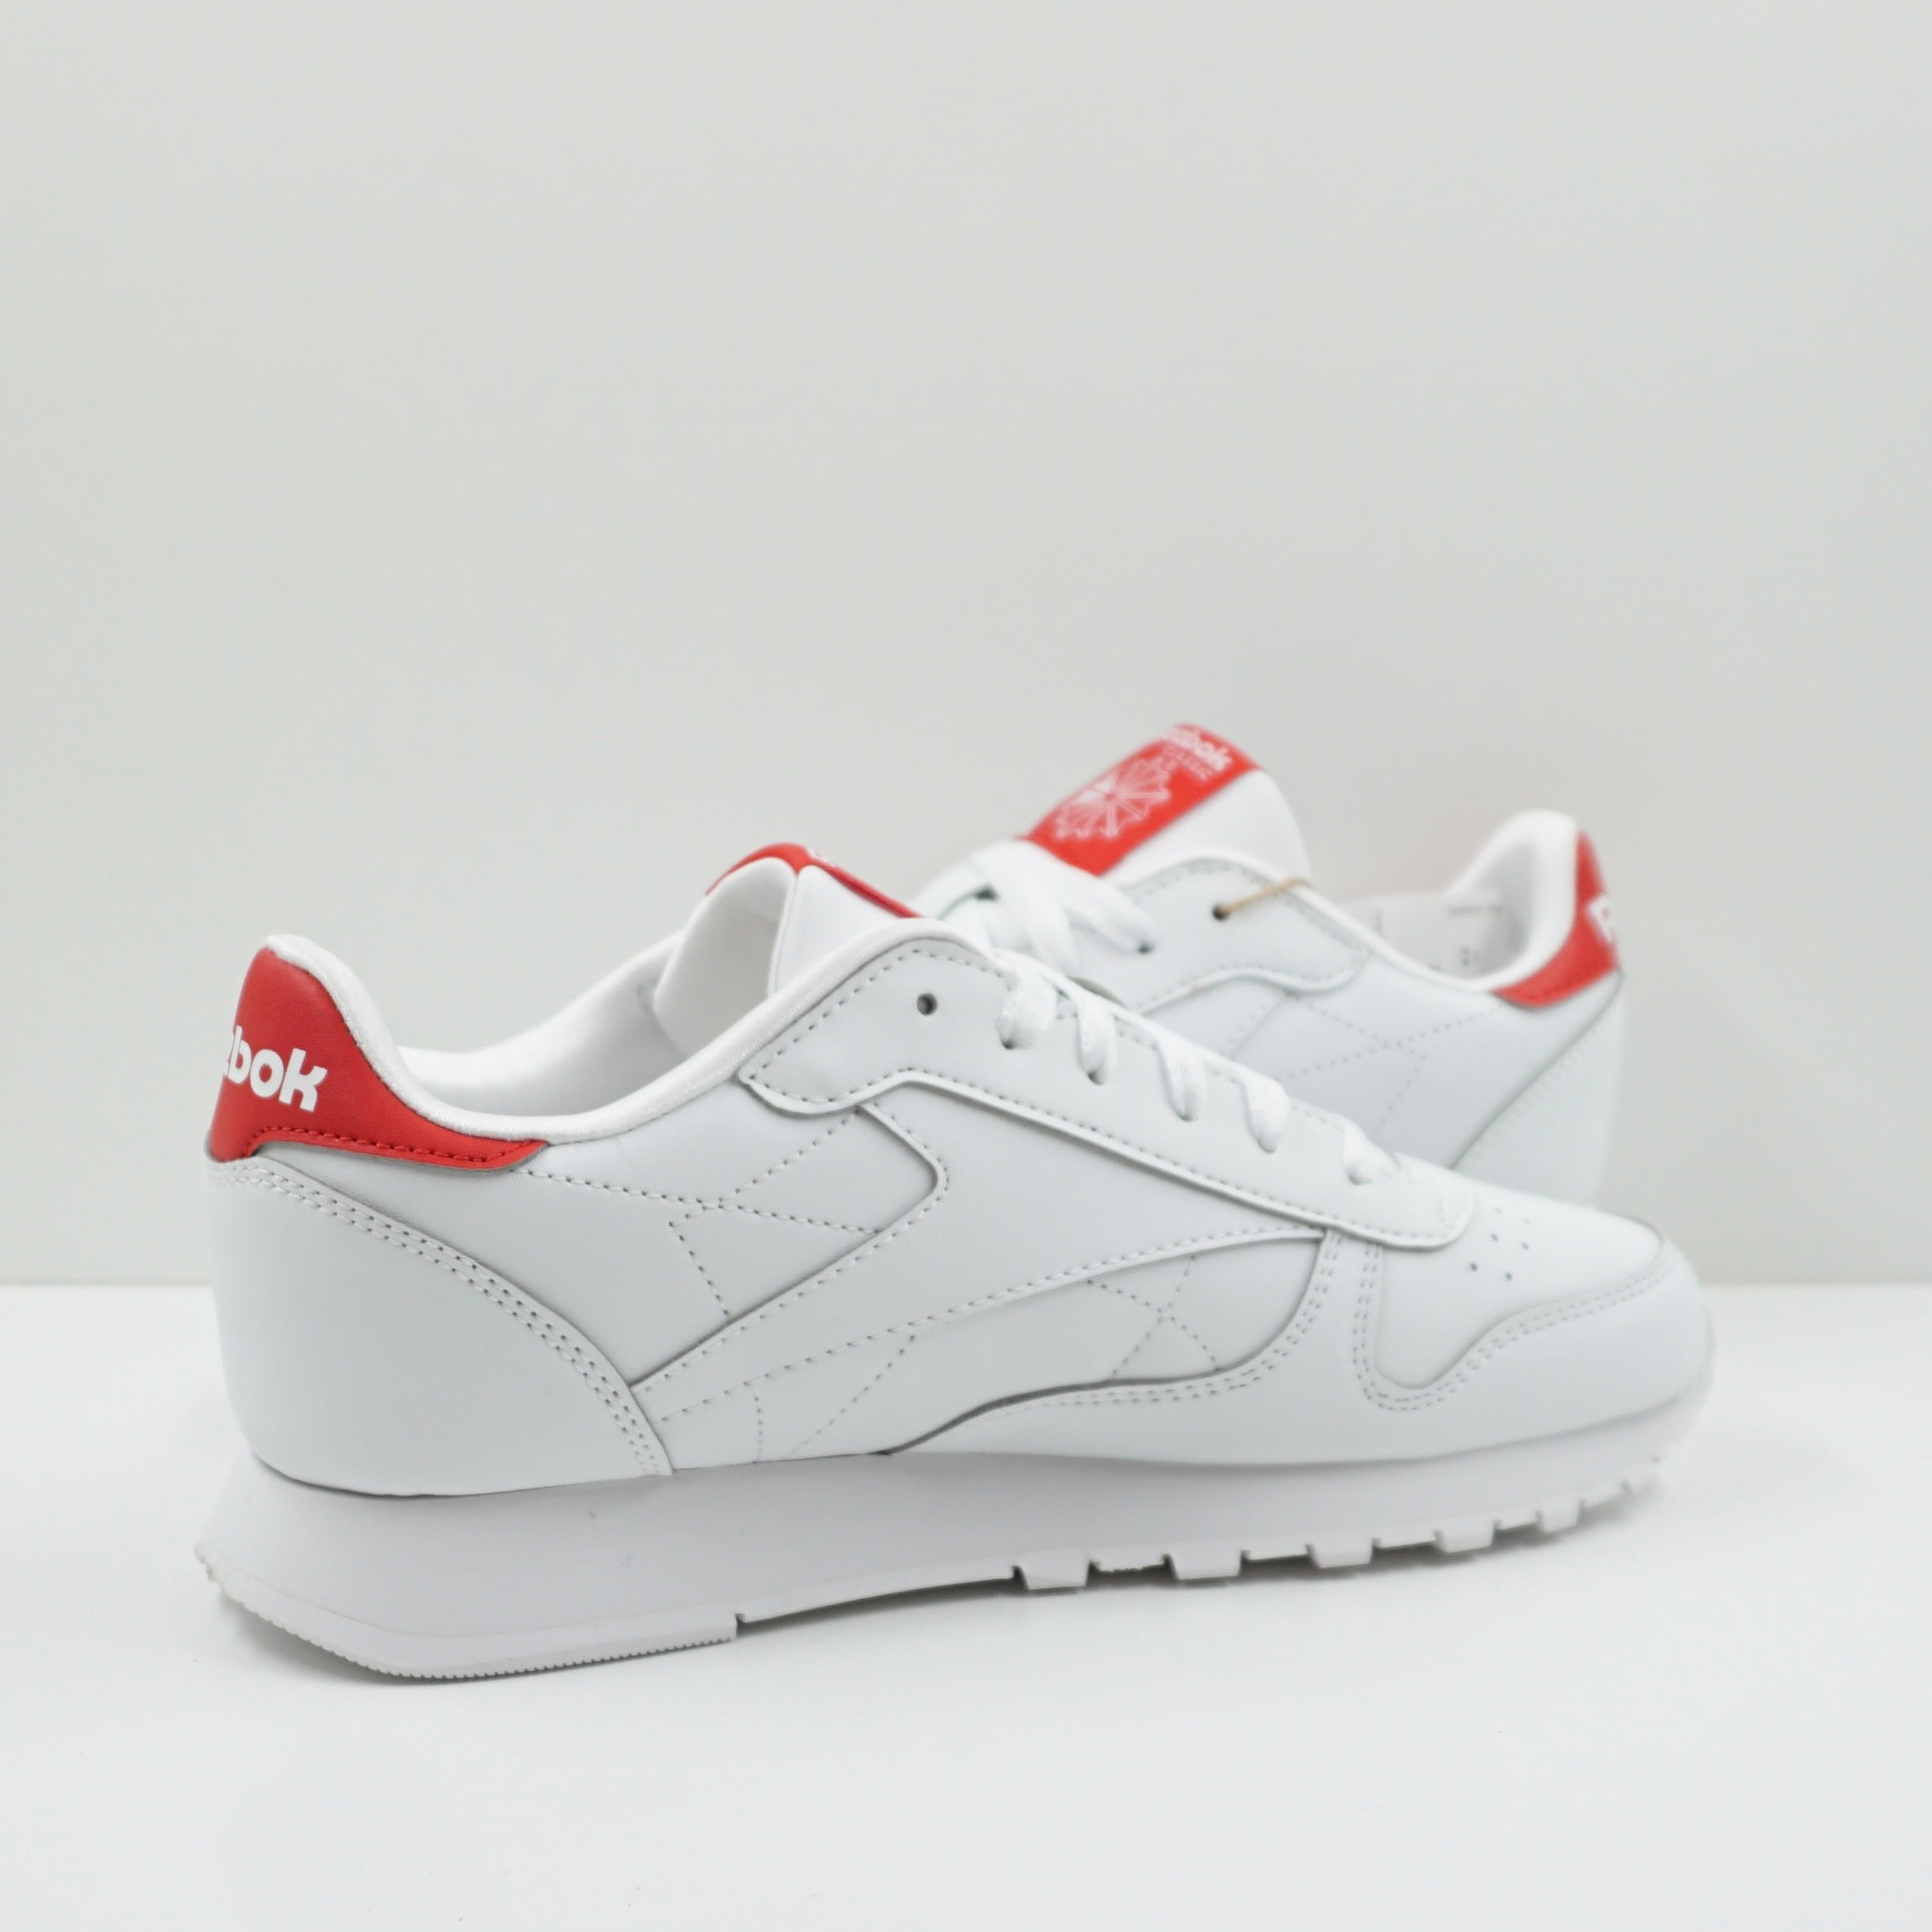 Reebok Classic Leather Flower Crowns White Red